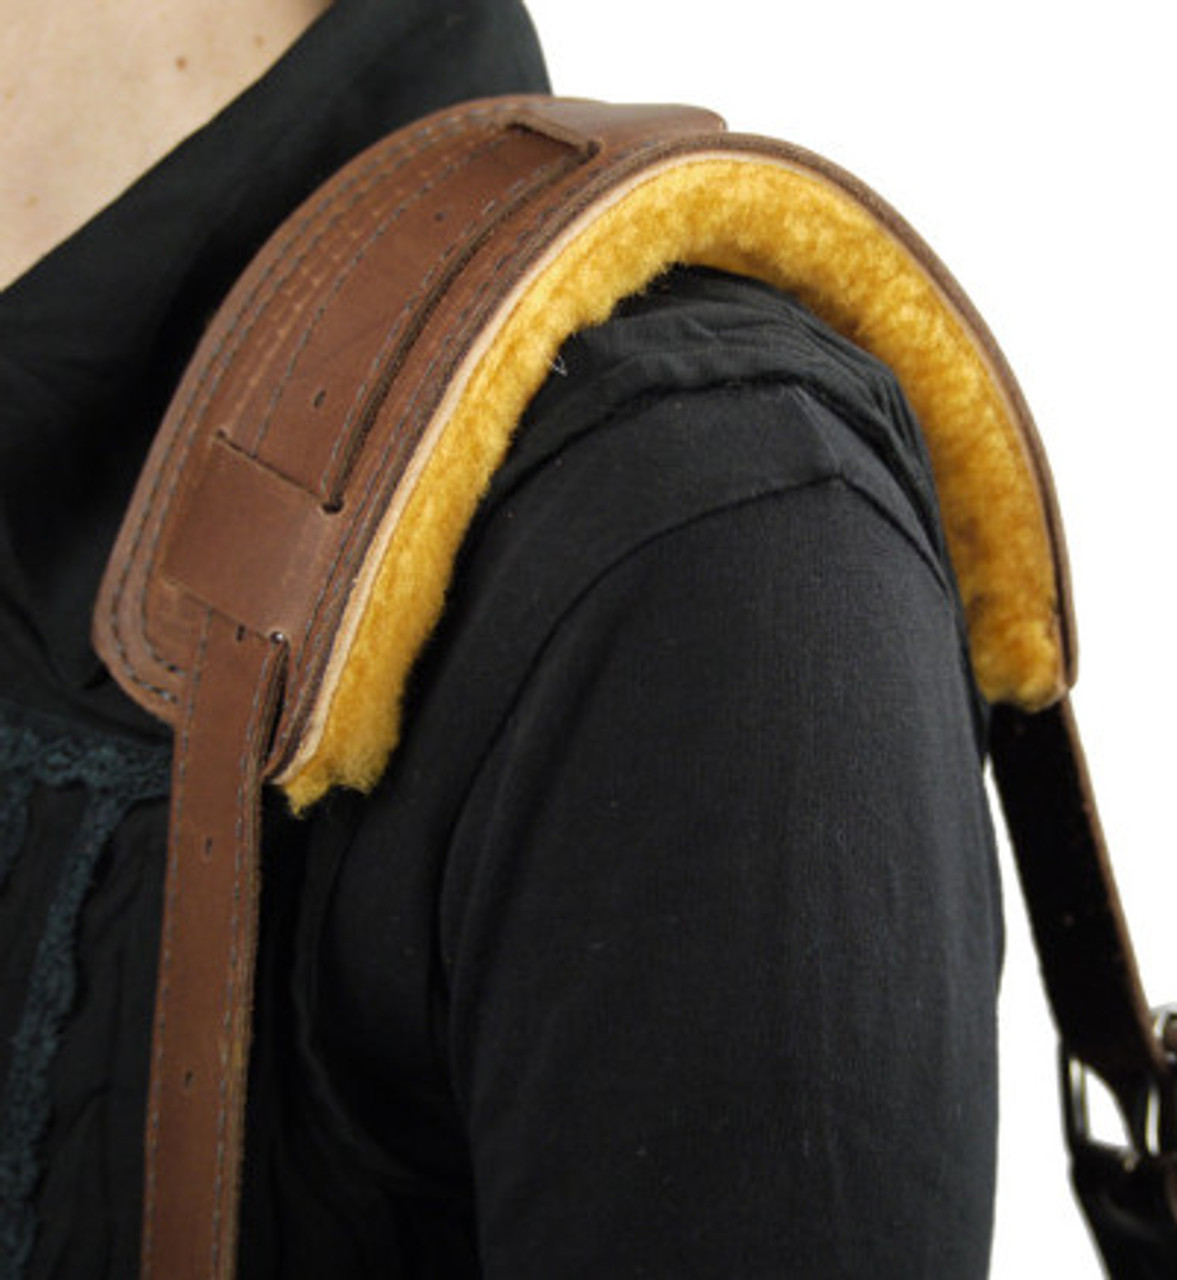 Sheeps Wool Shoulder Pad - Brown Made in the U.S.A.